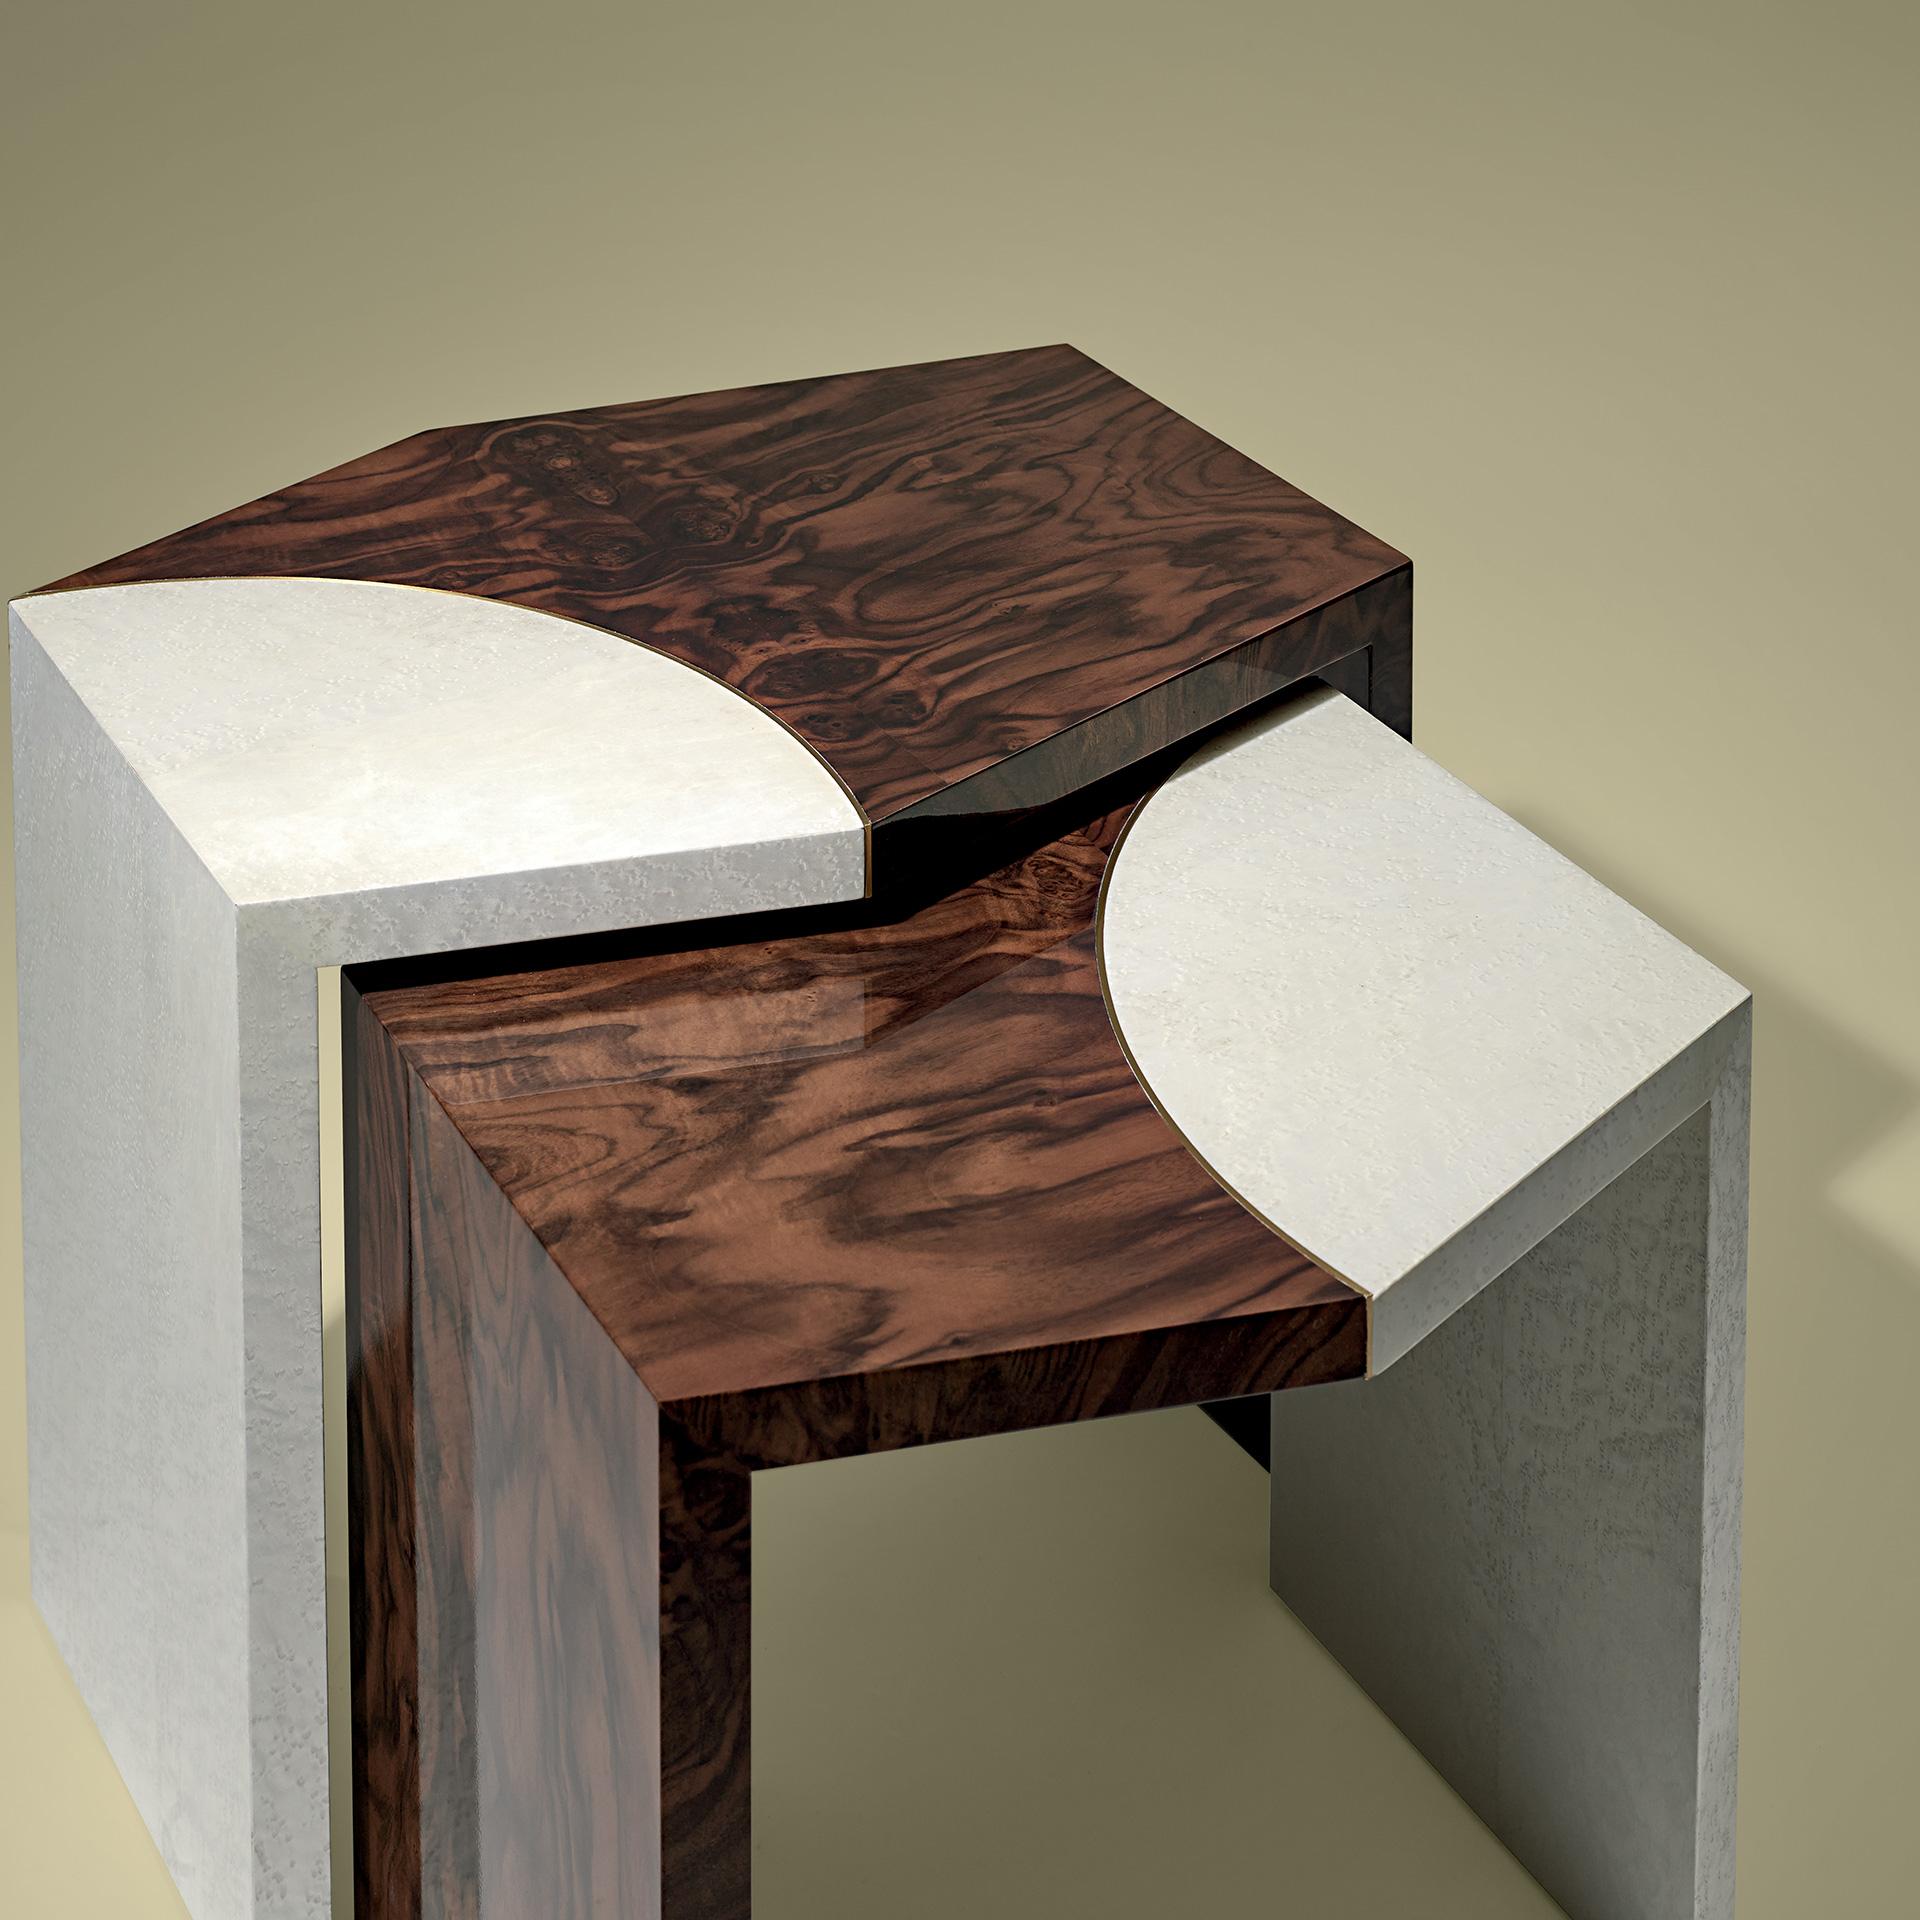 Table set in burr walnut and artic partridge eye. 

Also available in these dimensions: 18 x 20 x H 18 in.
 
Bespoke / Customizable
Identical shapes with different sizes and finishings.
All RAL colors available. (Mate / Half Gloss / Gloss)